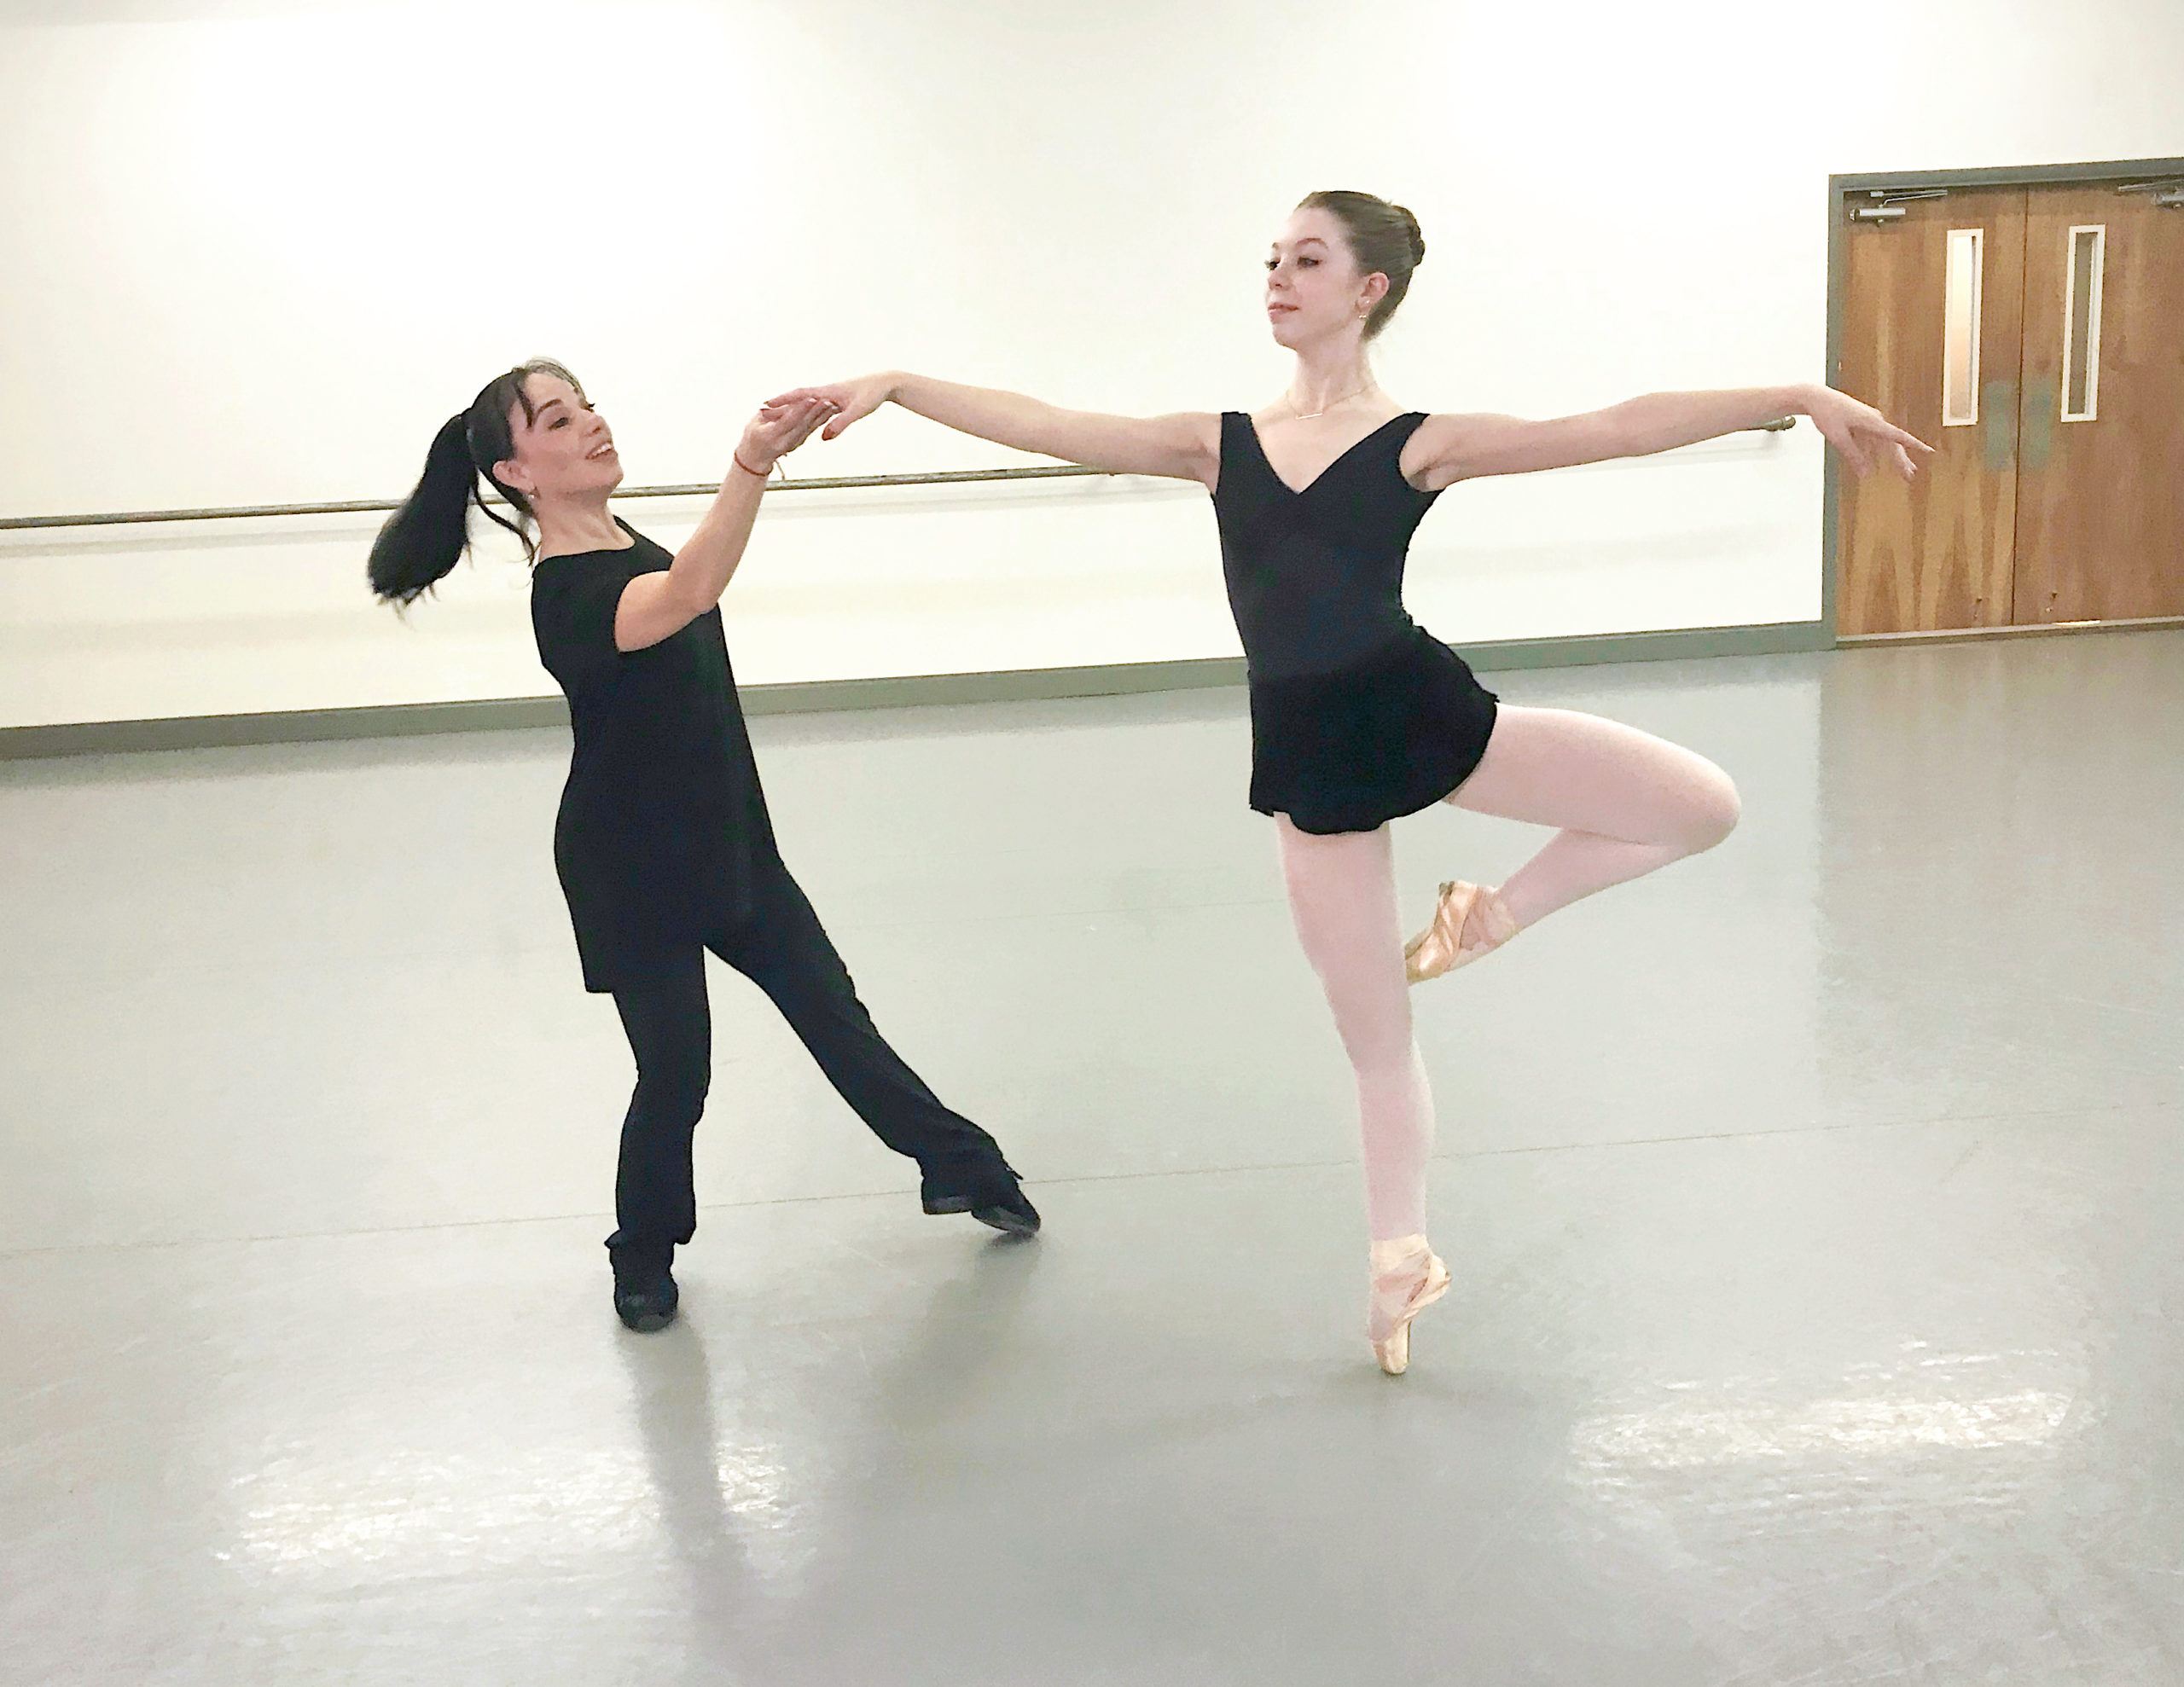 Katia Garza, wearing black pants and a long T-shirt, holds McKinley White's right hand as she practice a piquè turn manège. Mckinley wears a black leotard and ballet skirt, pink tights and pointe shoes, and they practice in a large dance studio.